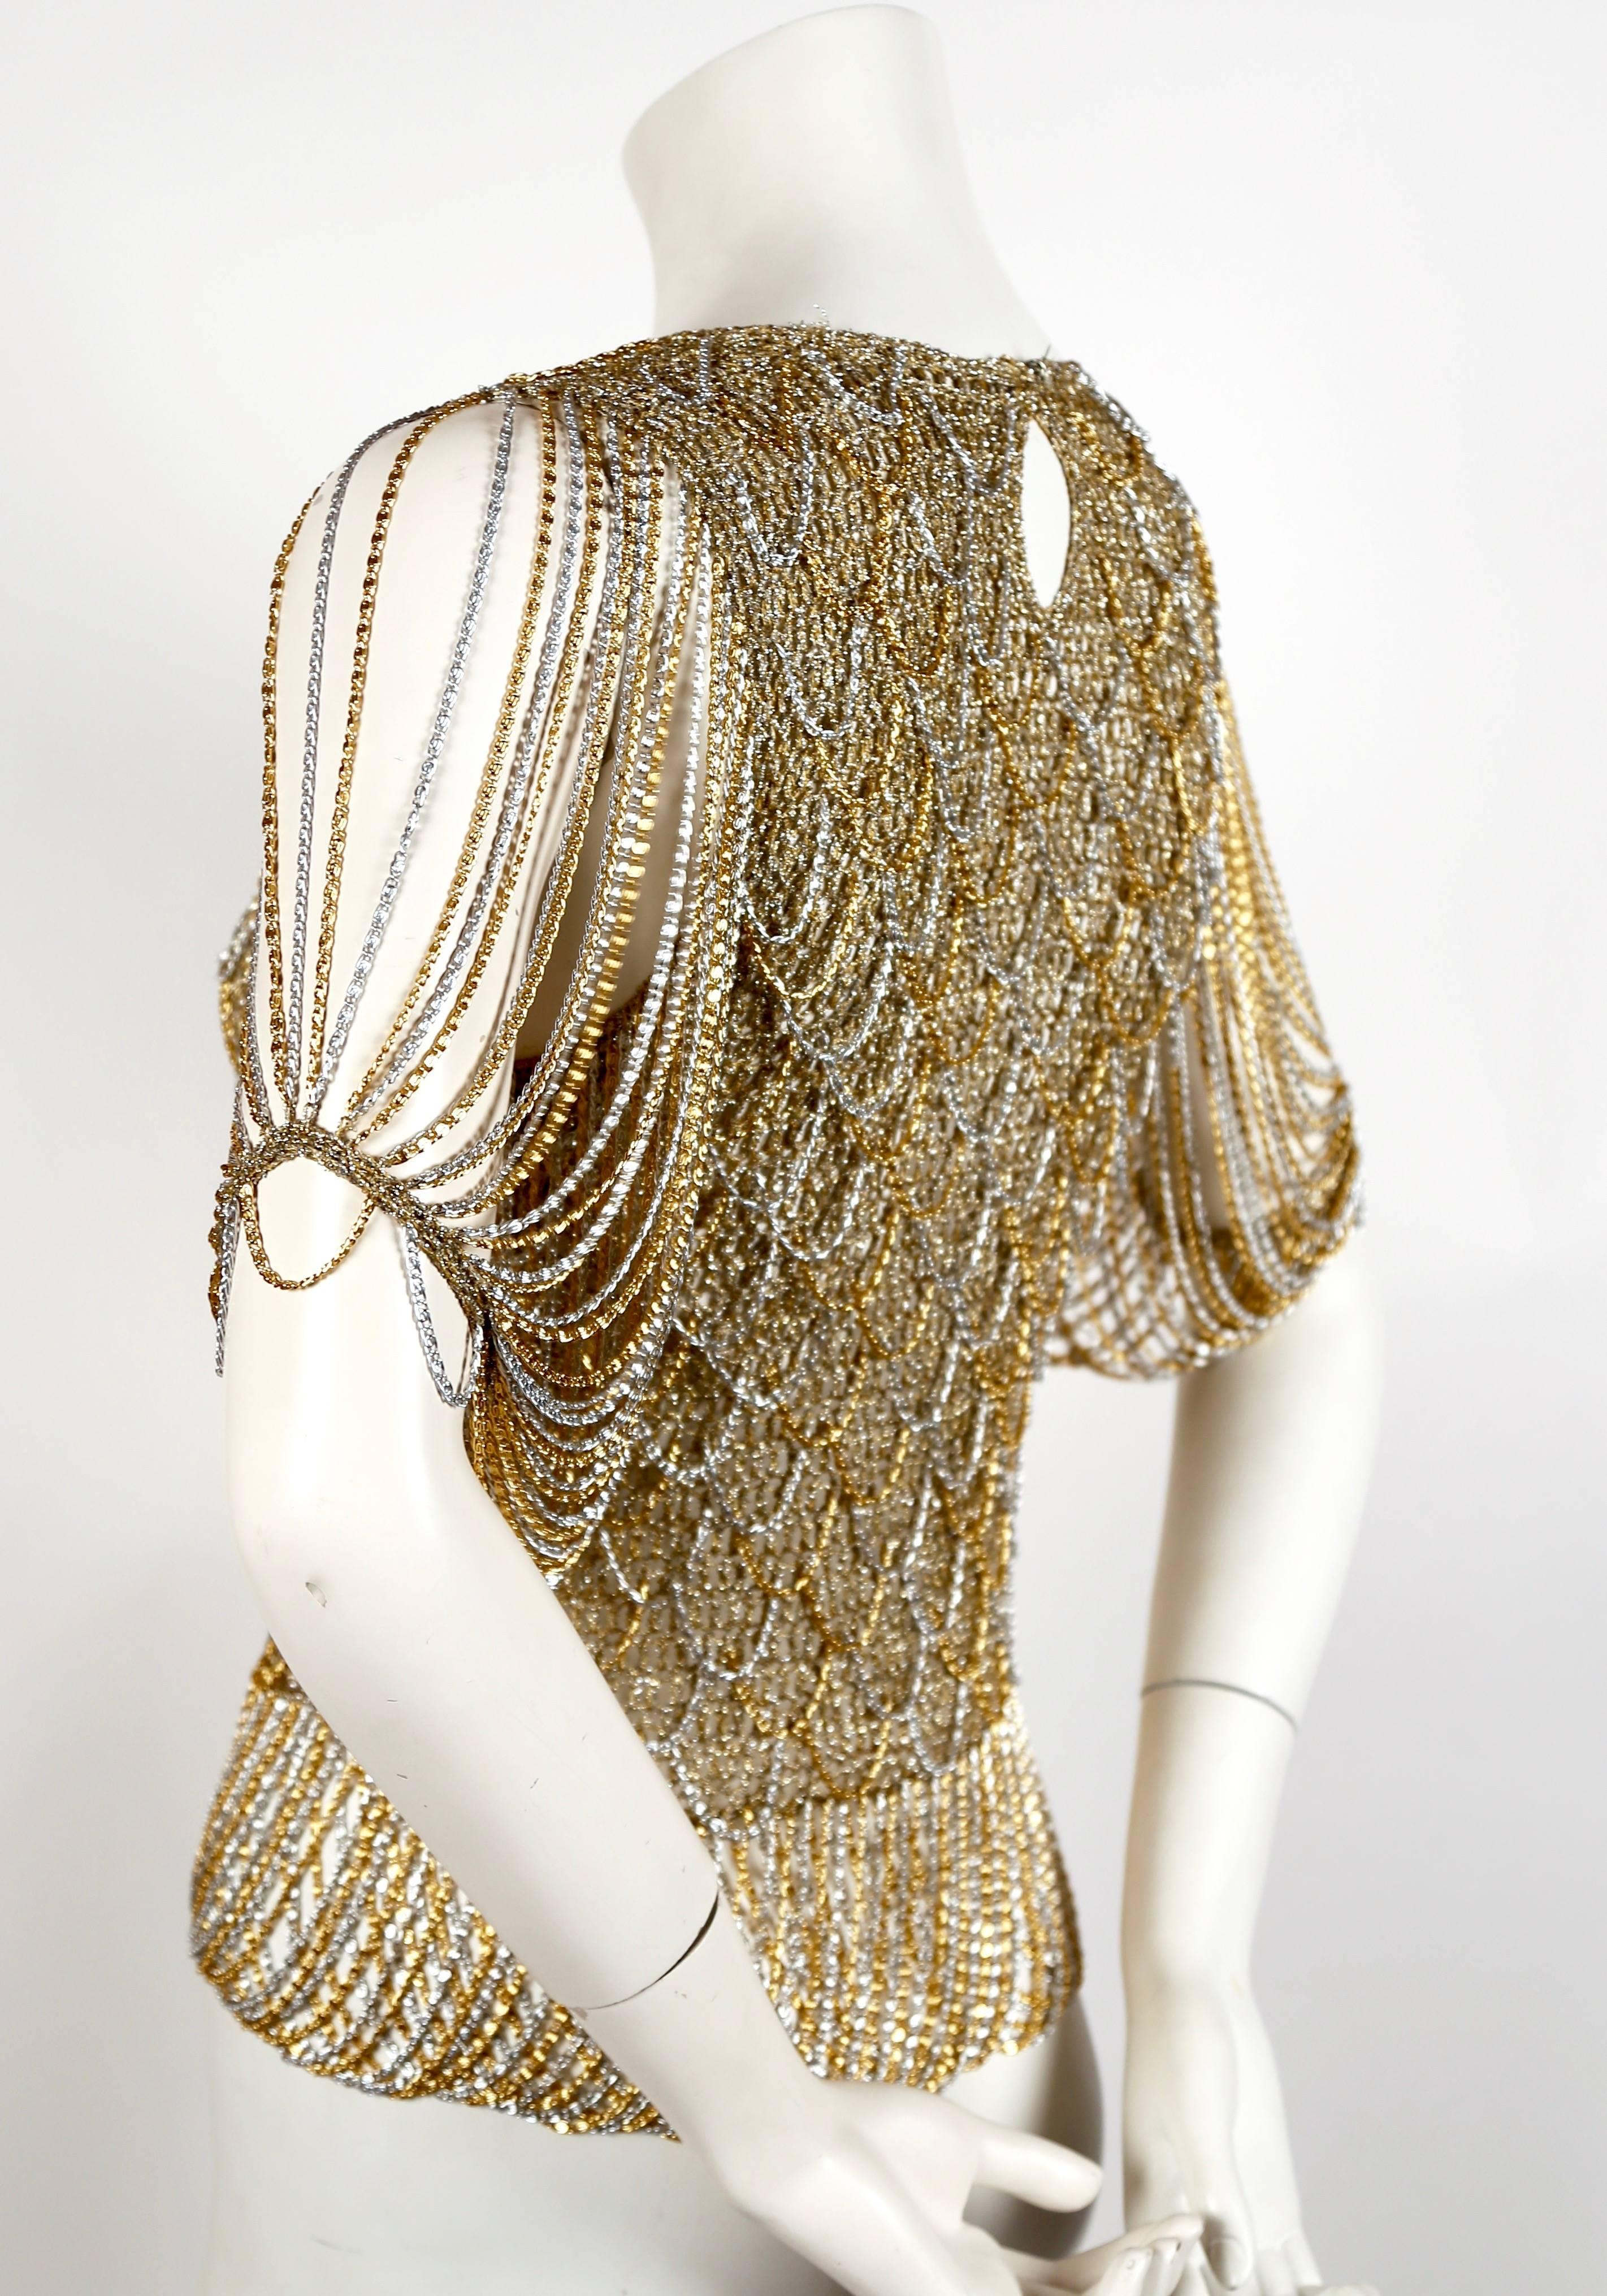 Intricately woven gold and silver metallic sweater intertwined with chain from Loris Azzaro dating to the 1973. Same style sweater as seen in Helmut Newton photograph. Fits a size XS or S. Approximate measurements (unstretched): 26" at bust and